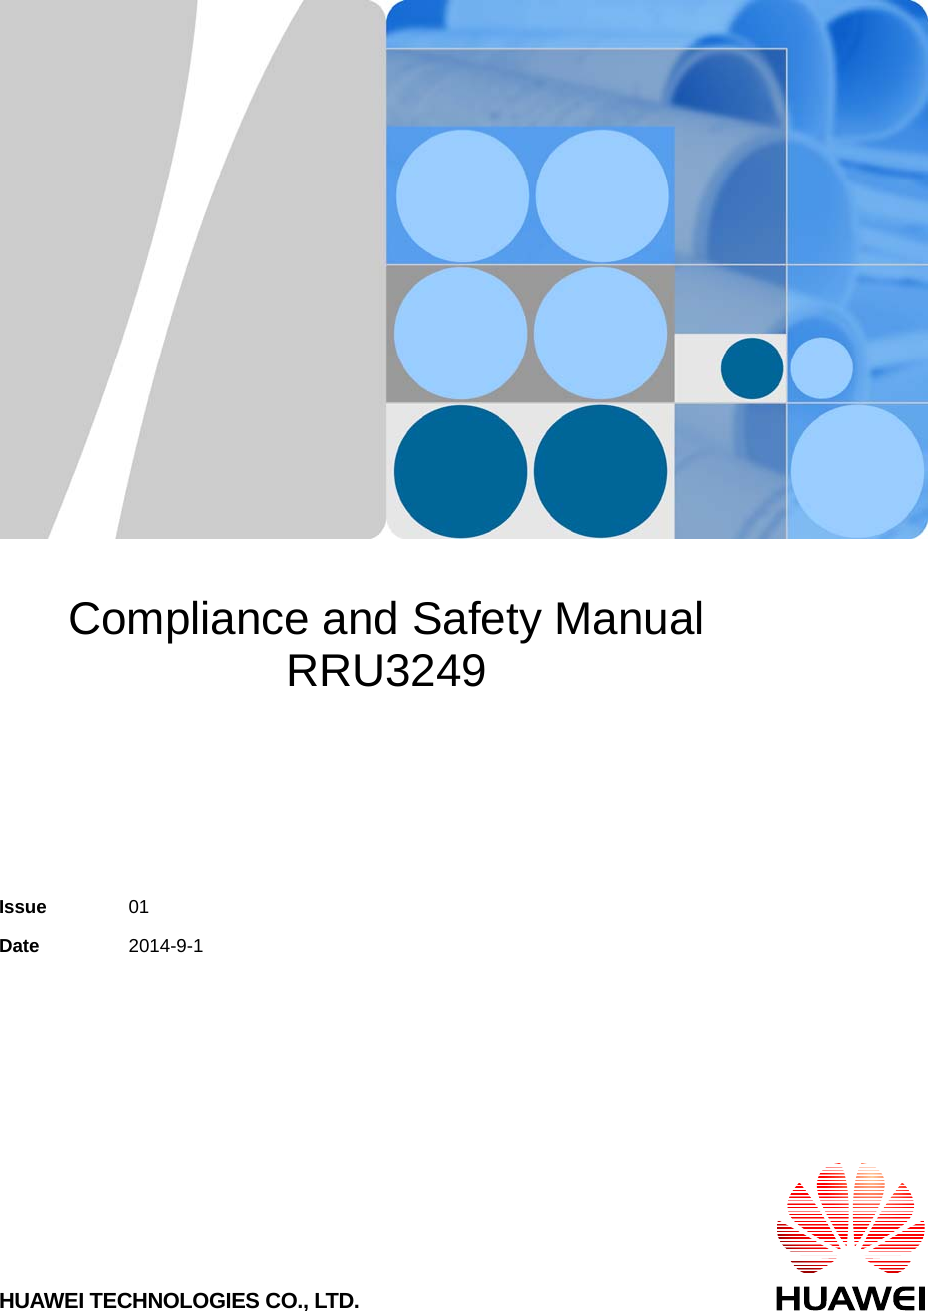       Compliance and Safety Manual RRU3249    Issue  01 Date  2014-9-1 HUAWEI TECHNOLOGIES CO., LTD. 